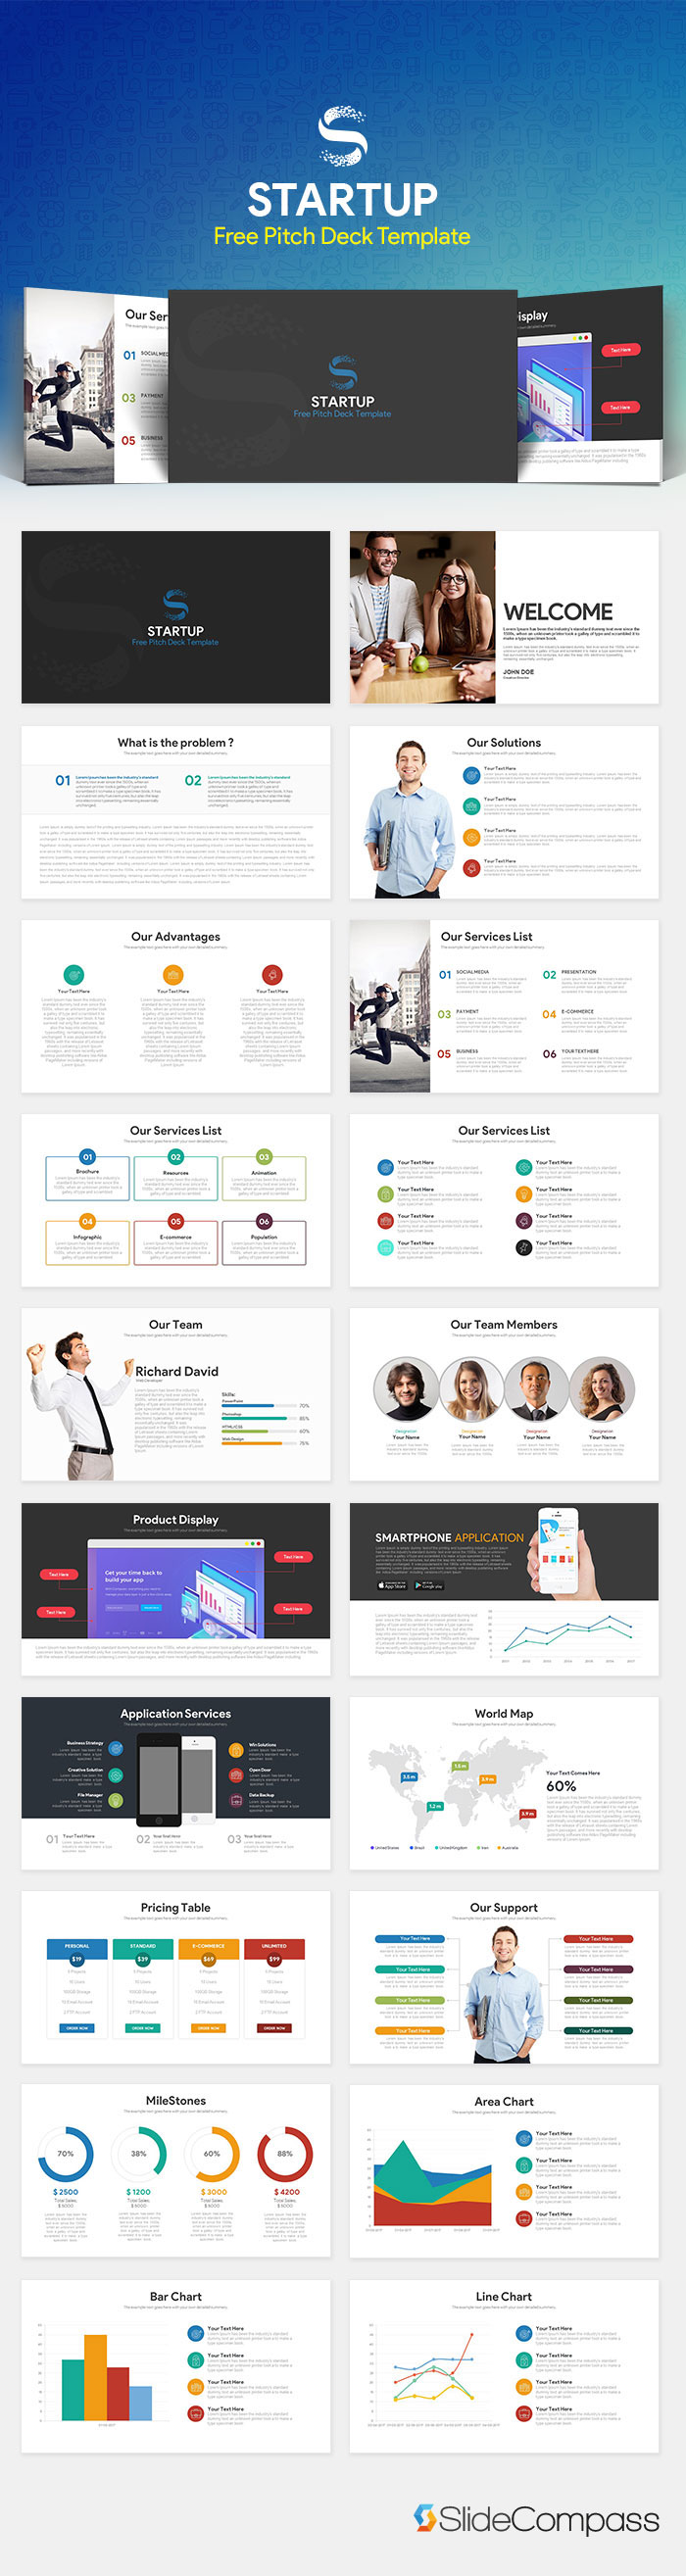 Startup Free Pitch Deck PowerPoint Template free template Powerpoint slidecompass